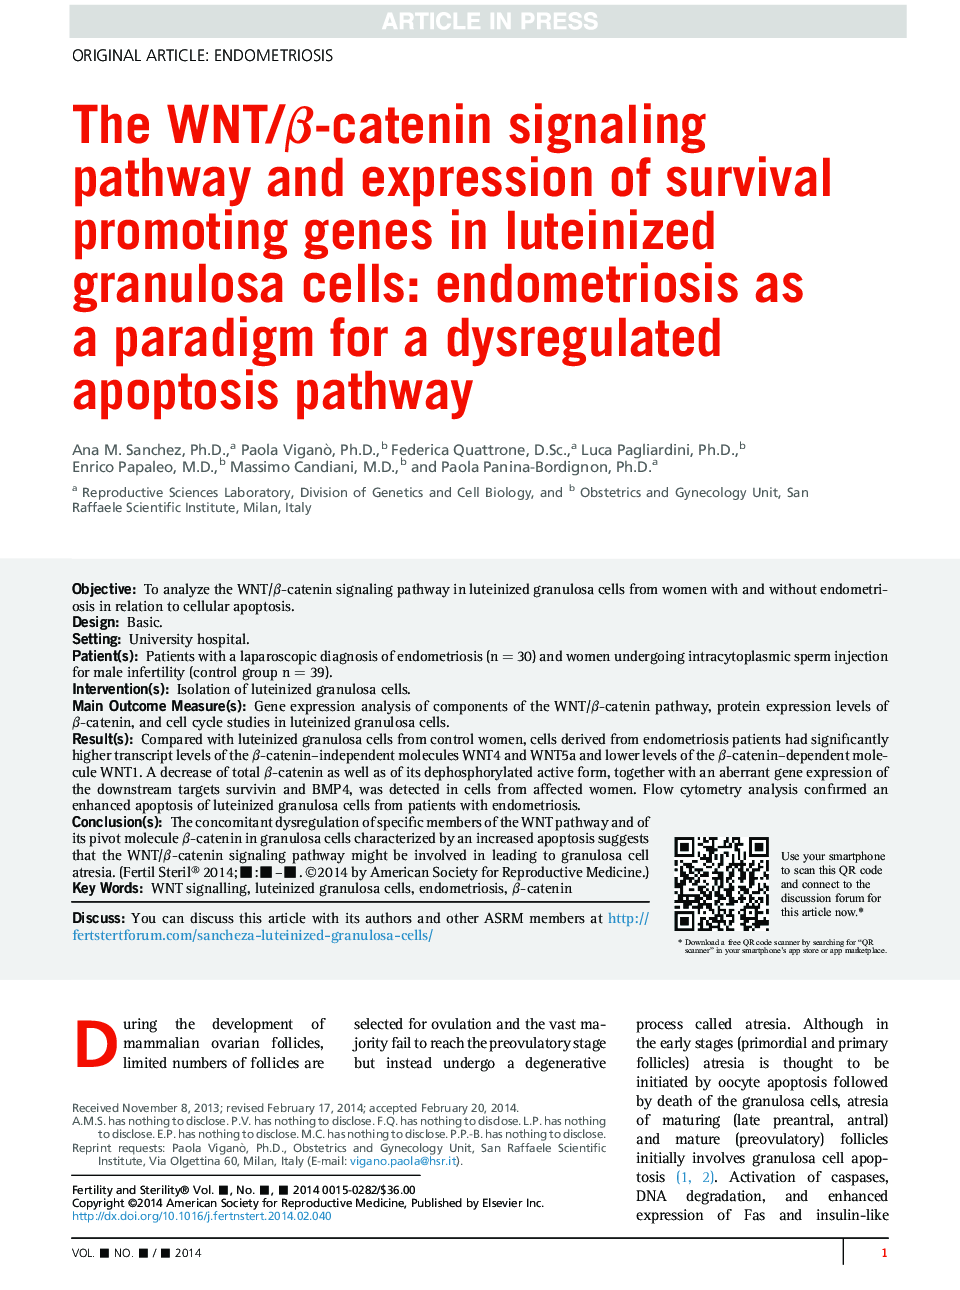 The WNT/Î²-catenin signaling pathway and expression of survival promoting genes in luteinized granulosa cells: endometriosis as a paradigm for a dysregulated apoptosis pathway